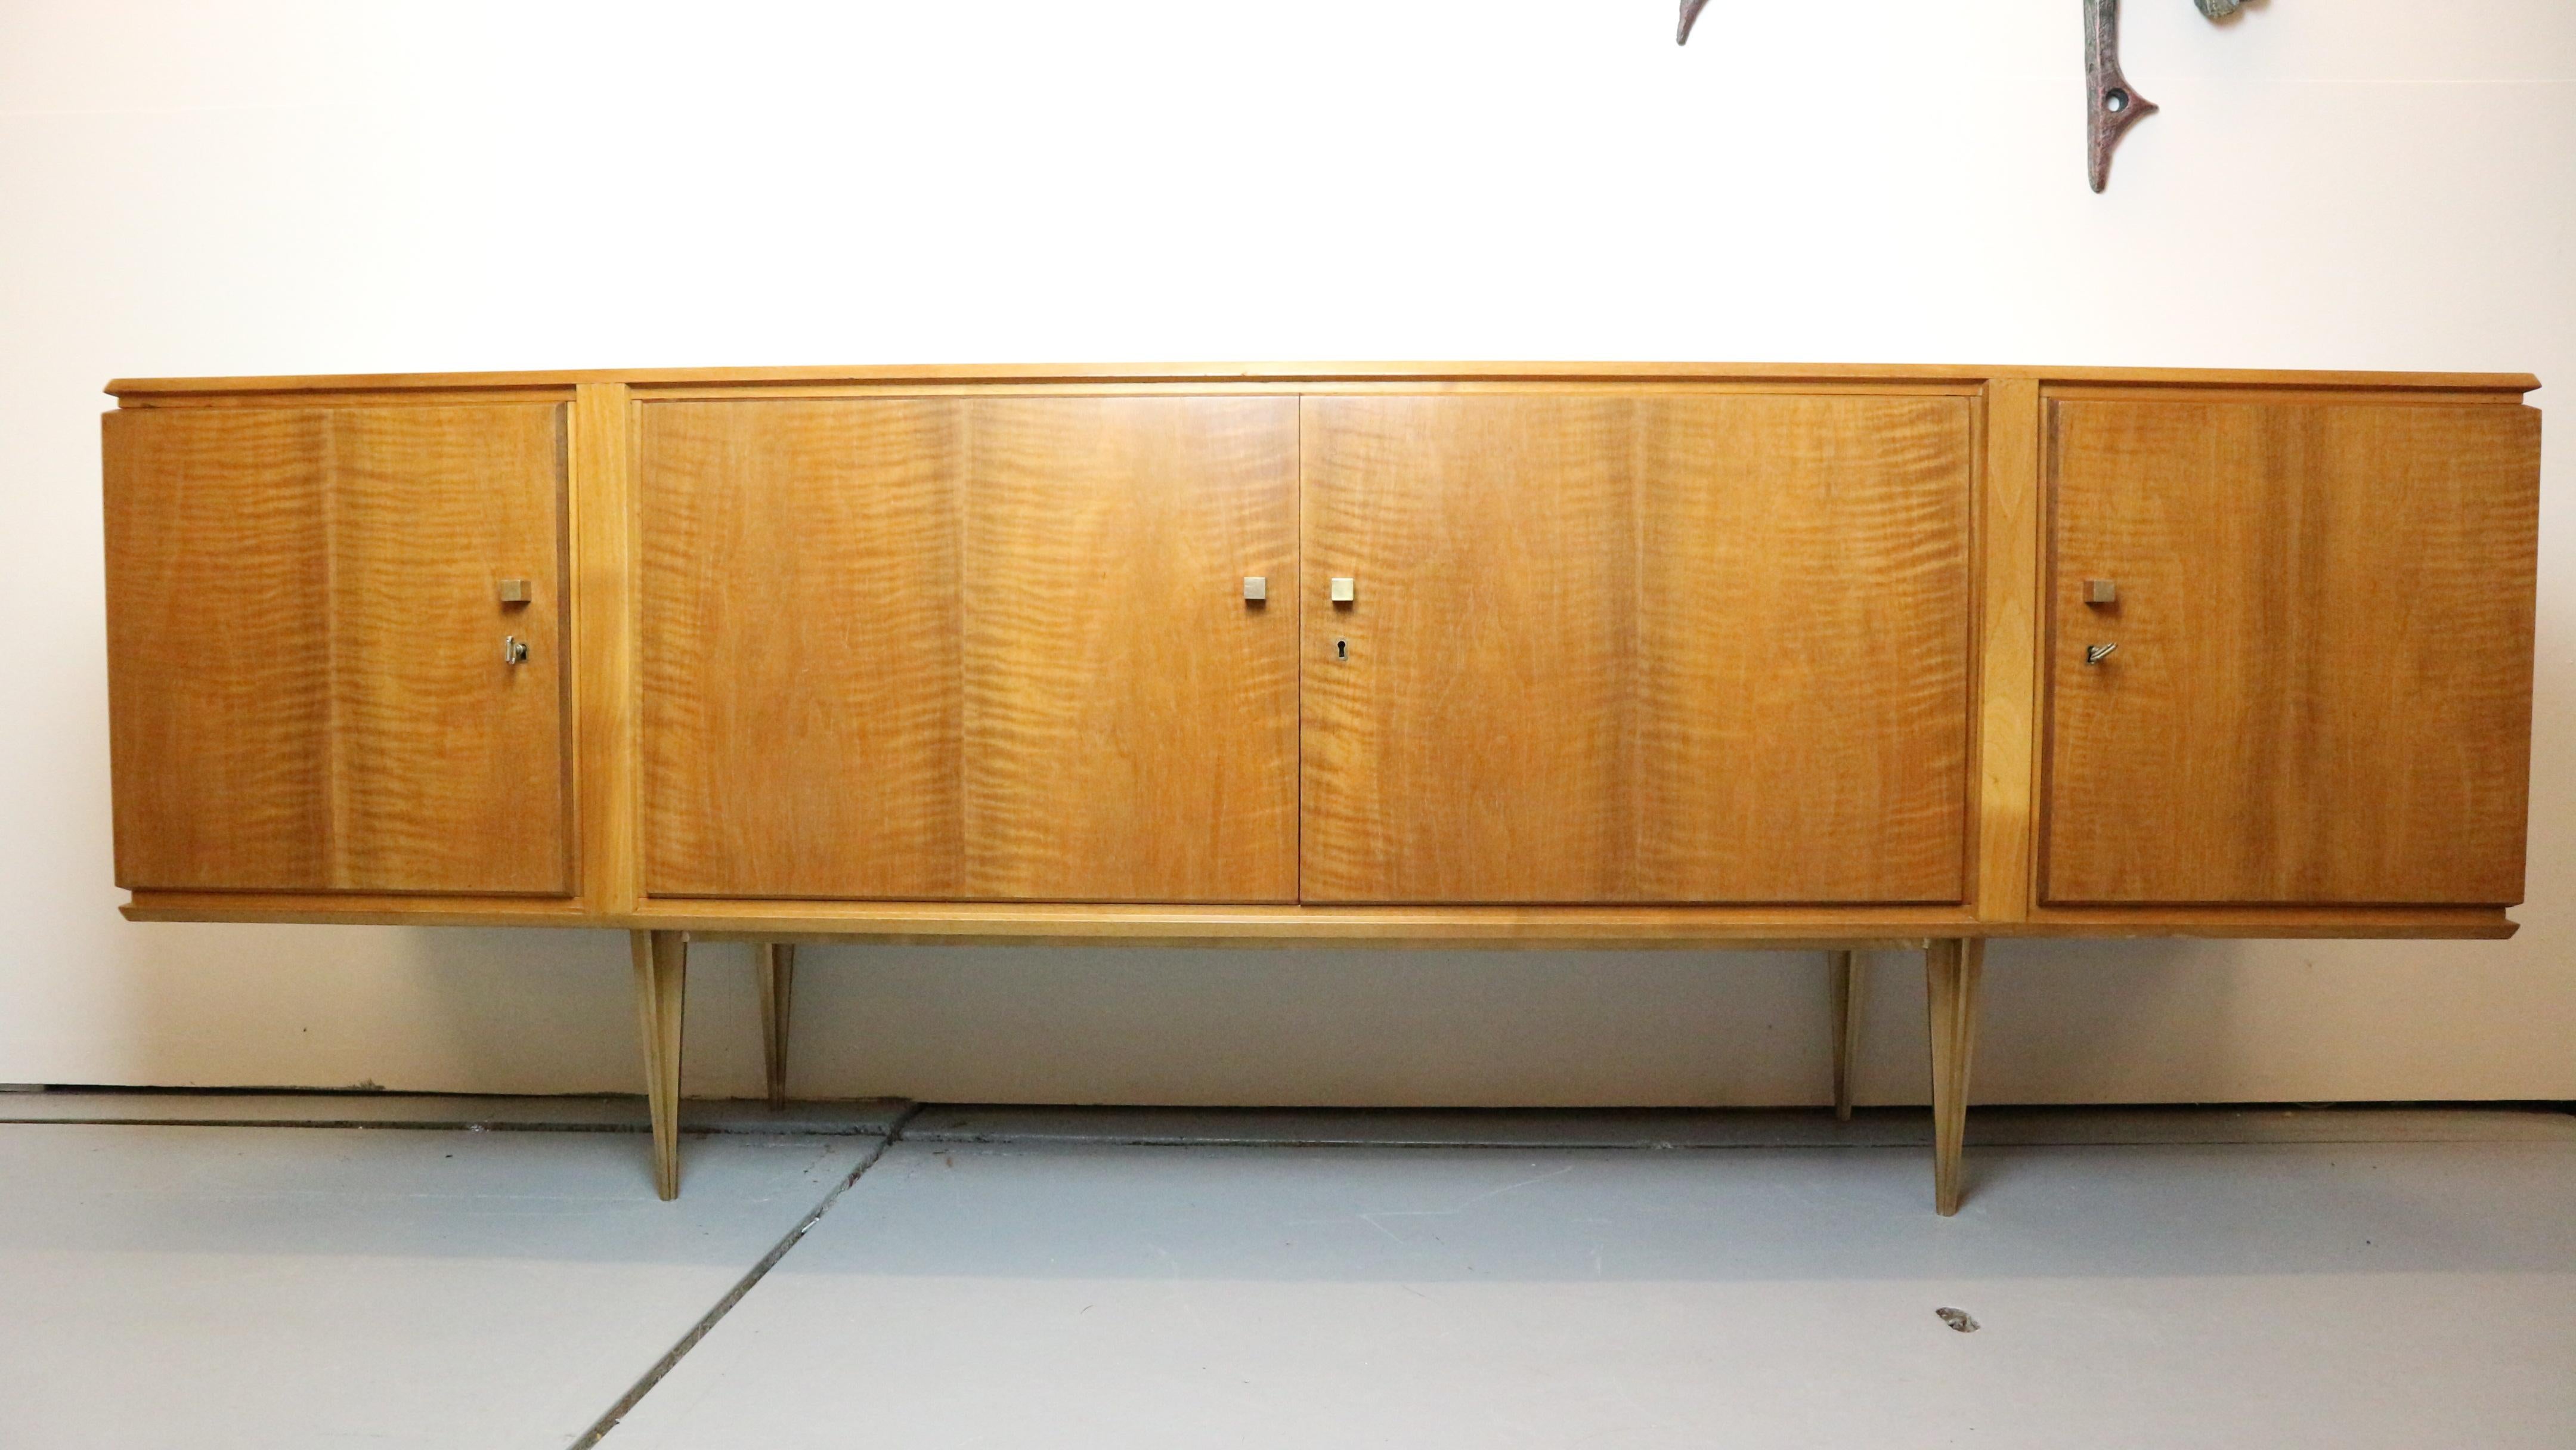 A beautiful and simple light colored walnut sideboard with brass details. 
Including 3 keys to open the doors, behind the doors you find lots of storage room. The brass details and the walnut veneer drawing gives it an very exclusive and modern